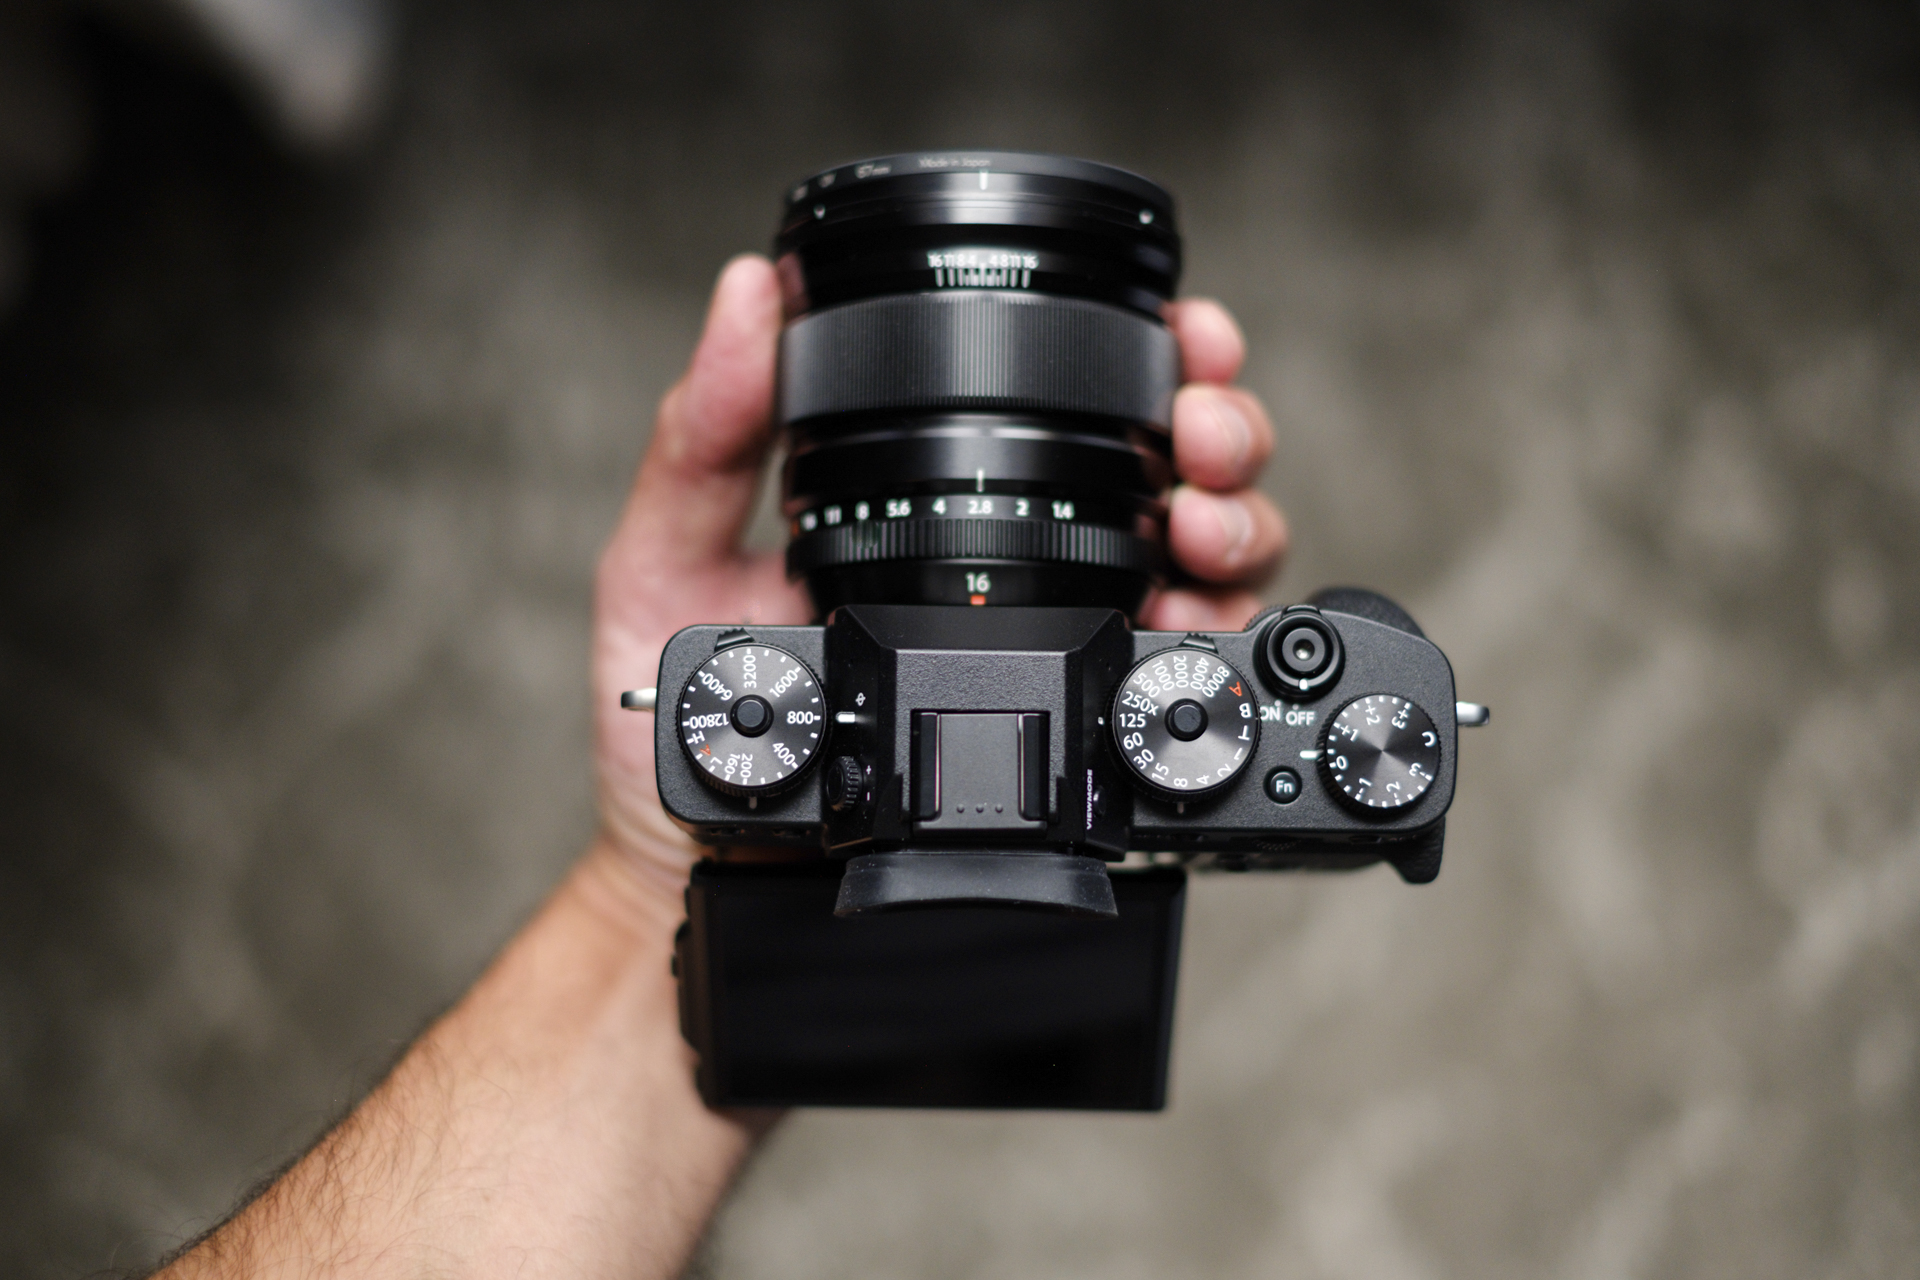 X-T3 | Why Fuss Frame? | Digital Trends